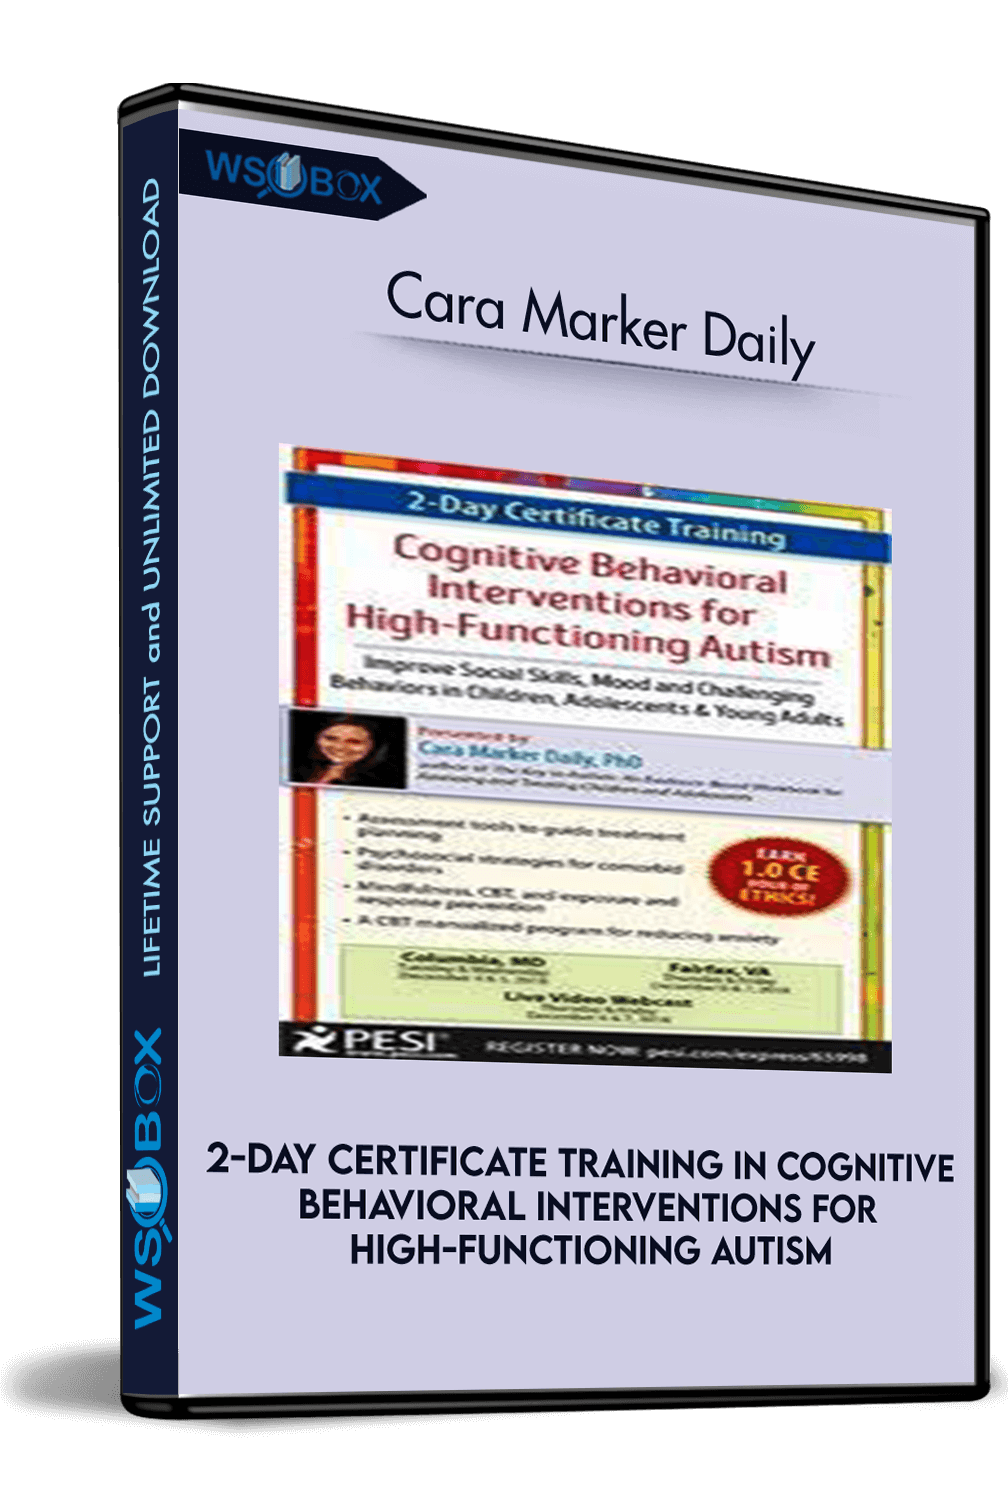 2-Day Certificate Training in Cognitive Behavioral Interventions for High-Functioning Autism: Improve Social Skills, Mood and Challenging Behaviors in Children, Adolescents & Young Adults  – Cara Marker Daily